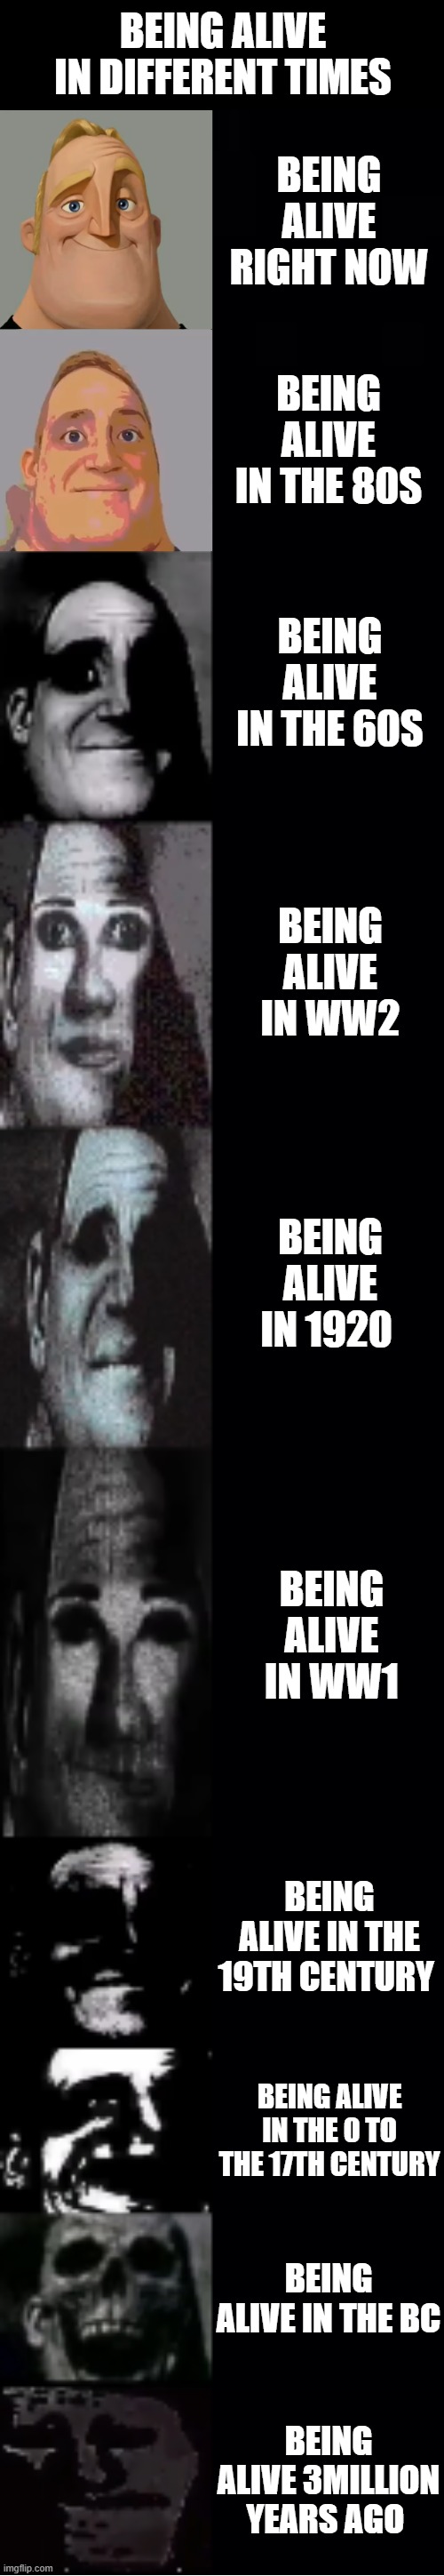 being a monkey | BEING ALIVE IN DIFFERENT TIMES; BEING ALIVE RIGHT NOW; BEING ALIVE IN THE 80S; BEING ALIVE IN THE 60S; BEING ALIVE IN WW2; BEING ALIVE IN 1920; BEING ALIVE IN WW1; BEING ALIVE IN THE 19TH CENTURY; BEING ALIVE IN THE 0 TO THE 17TH CENTURY; BEING ALIVE IN THE BC; BEING ALIVE 3MILLION YEARS AGO | image tagged in mr incredible becoming uncanny | made w/ Imgflip meme maker